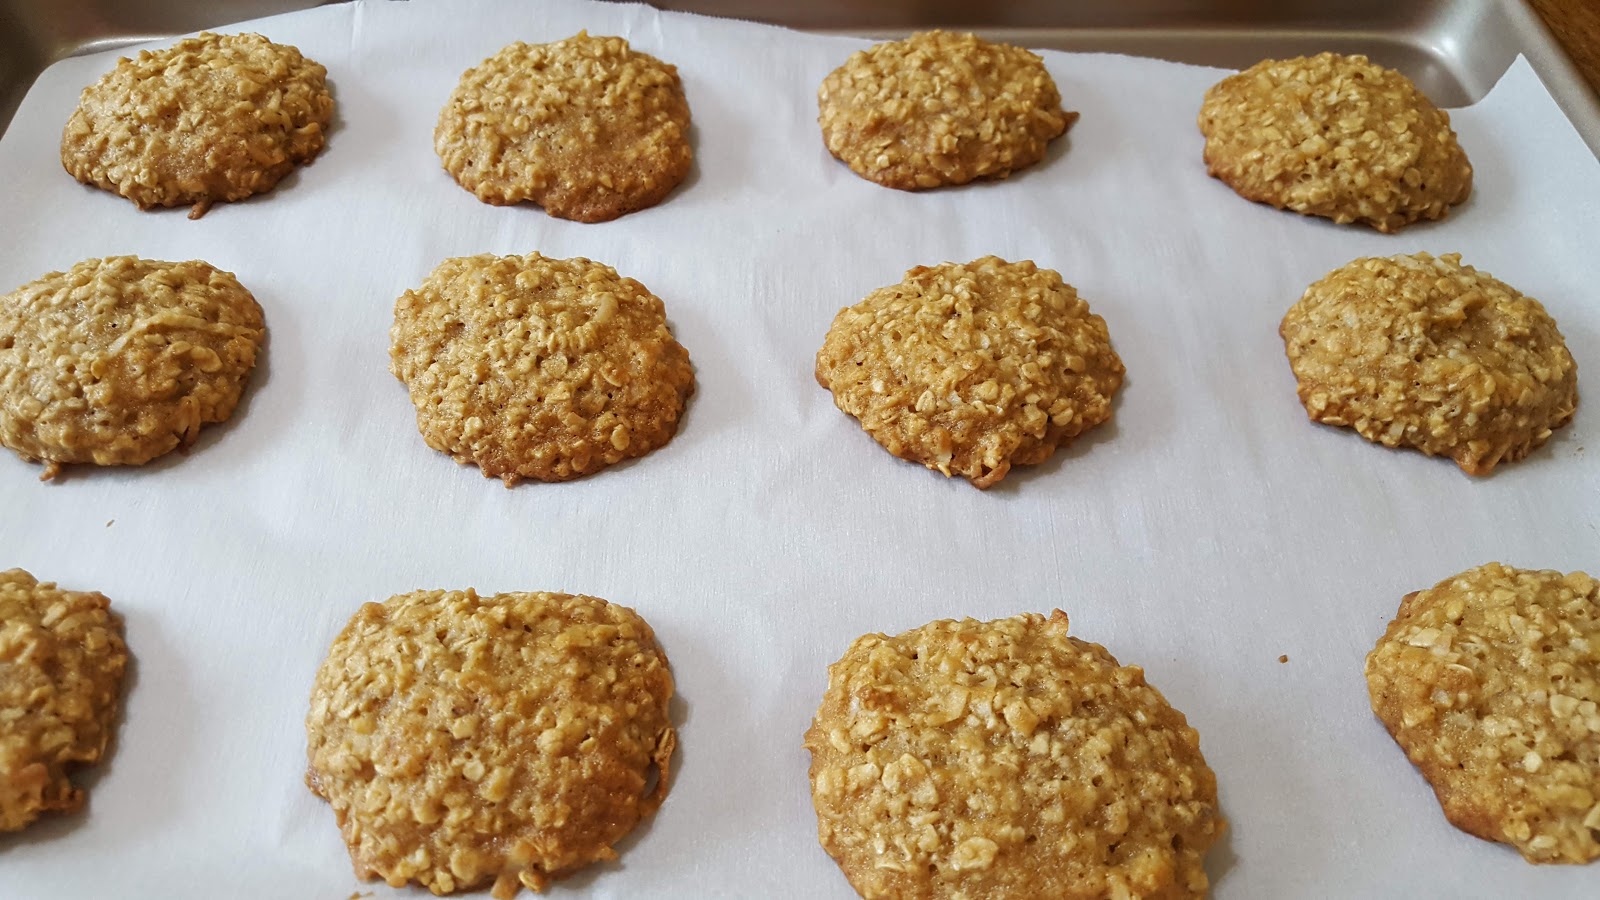 My Patchwork Quilt: (COCONUT) BANANA OATMEAL COOKIES